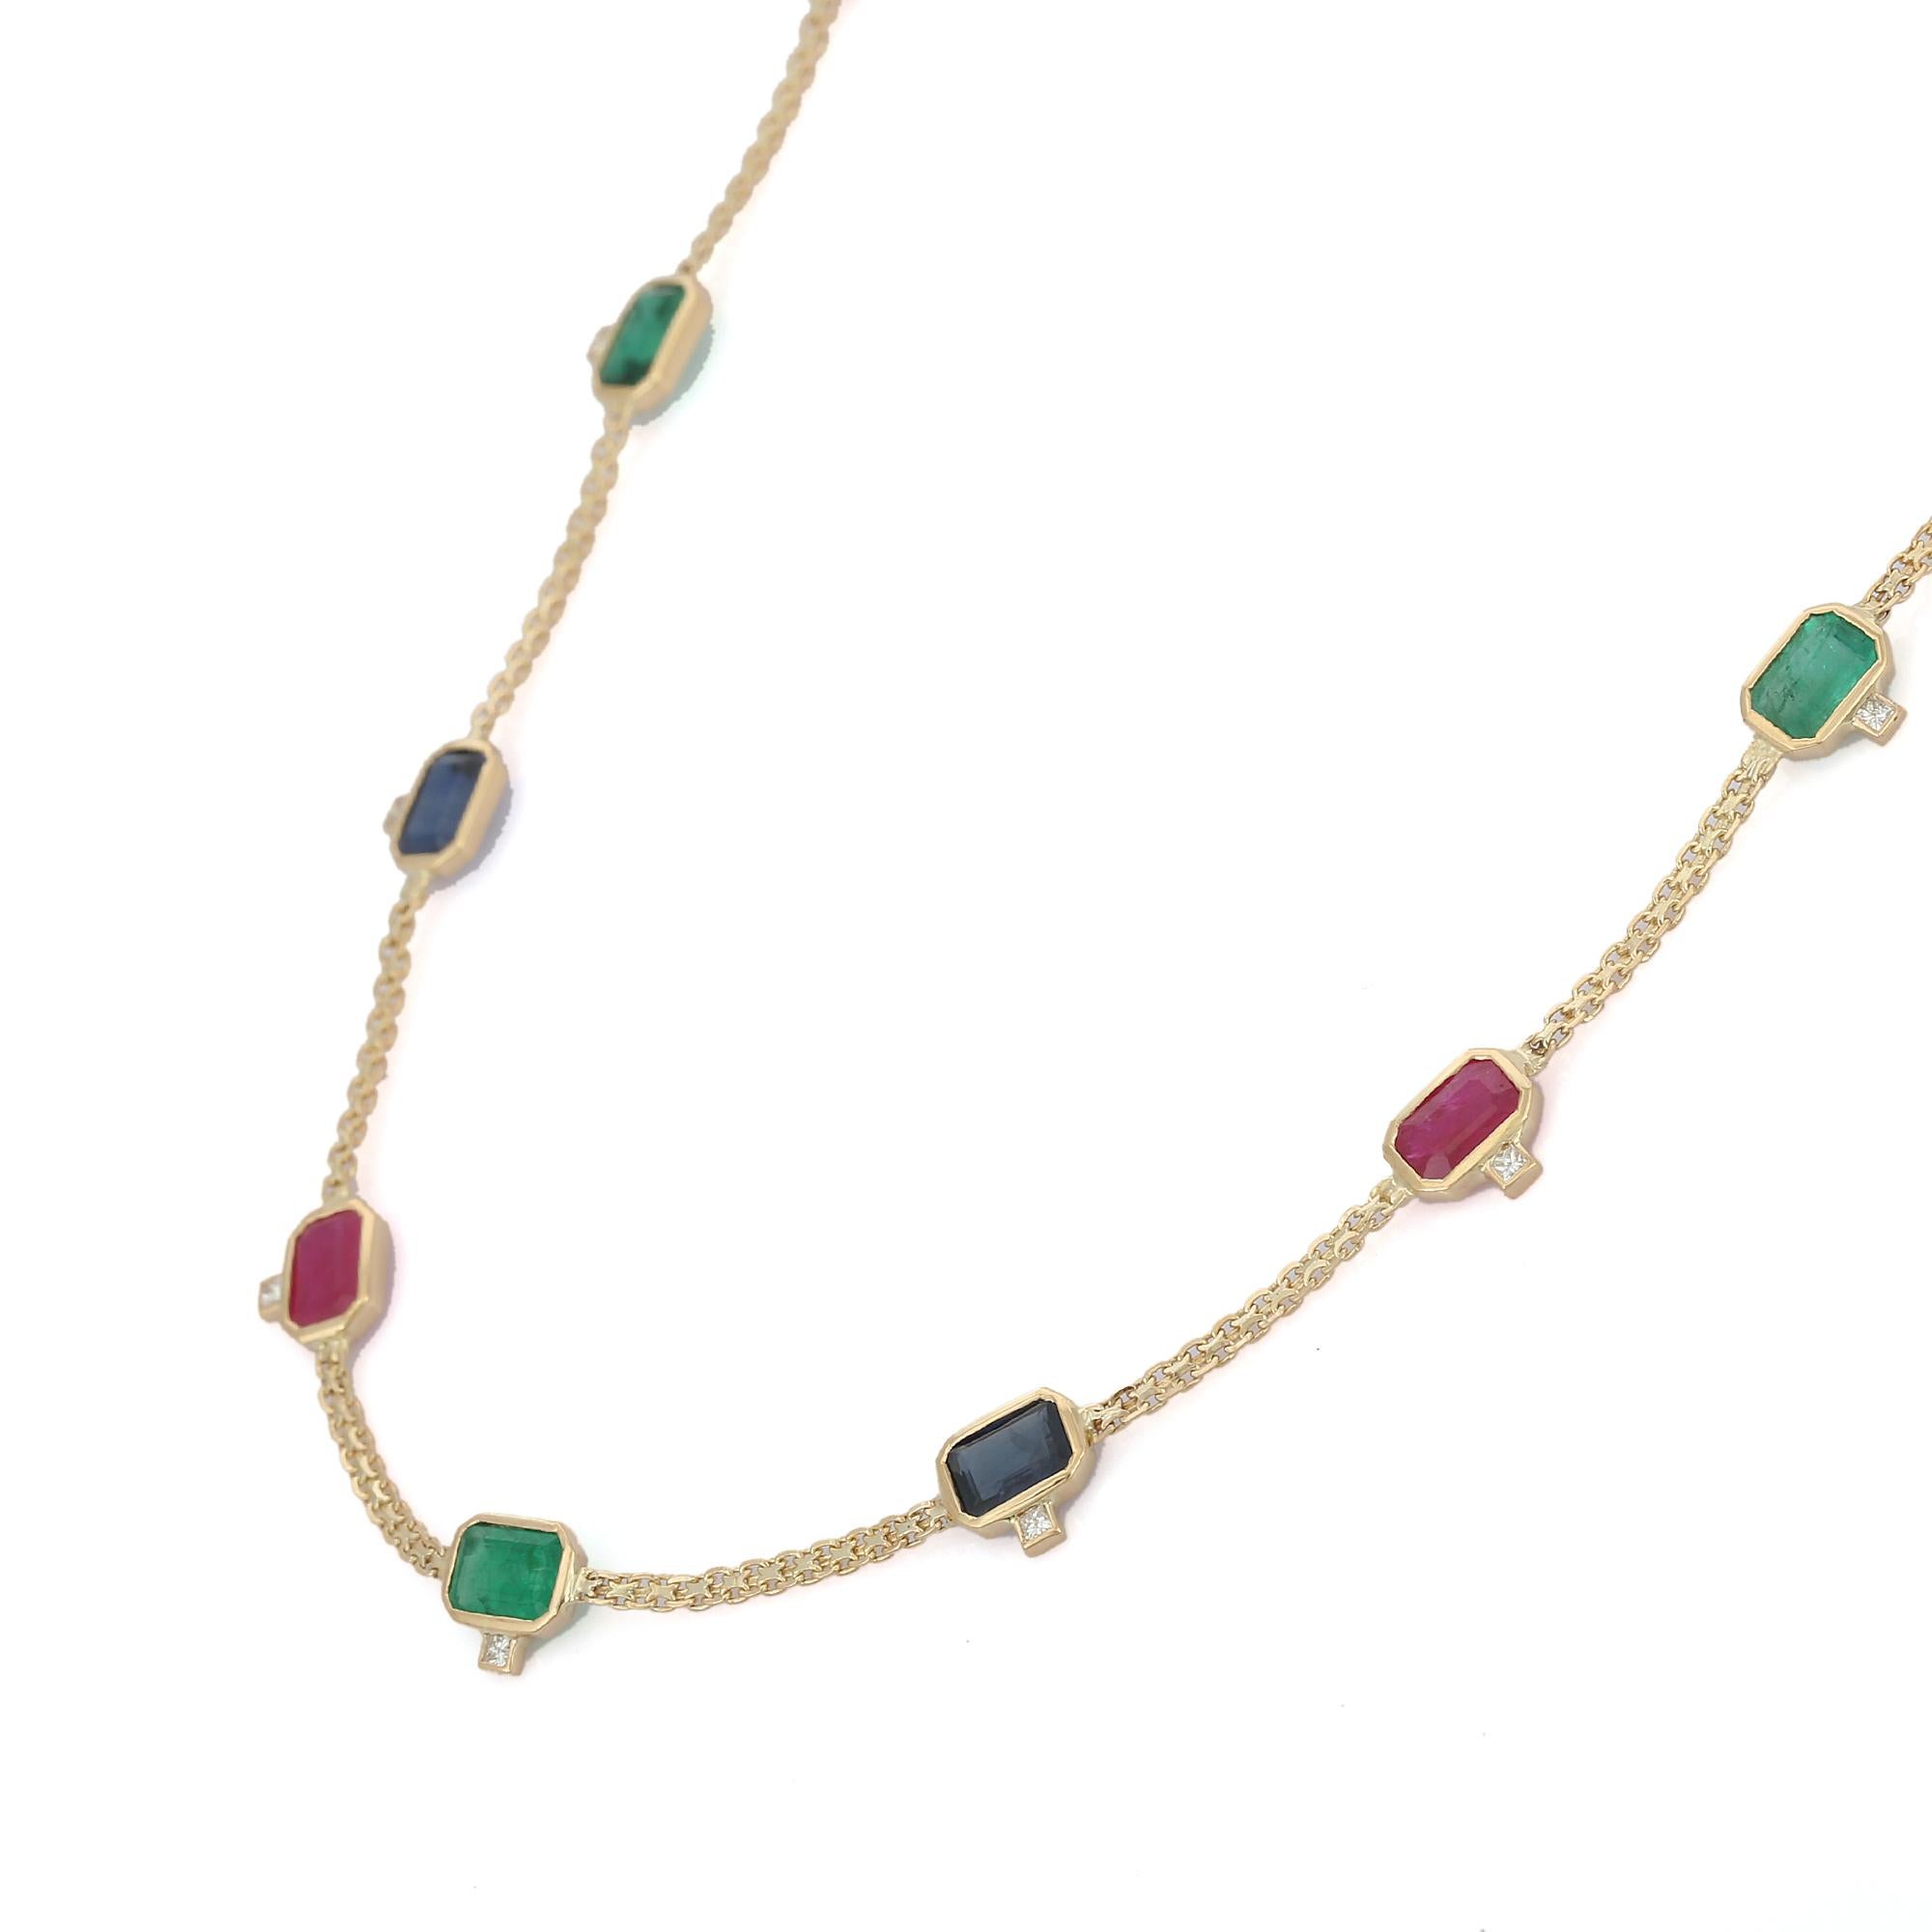 Multi Gemstone Necklace in 18K Gold studded with octagon cut emerald, ruby, sapphire pieces and diamonds.
Accessorize your look with this elegant multi gemstone beaded necklace. This stunning piece of jewelry instantly elevates a casual look or